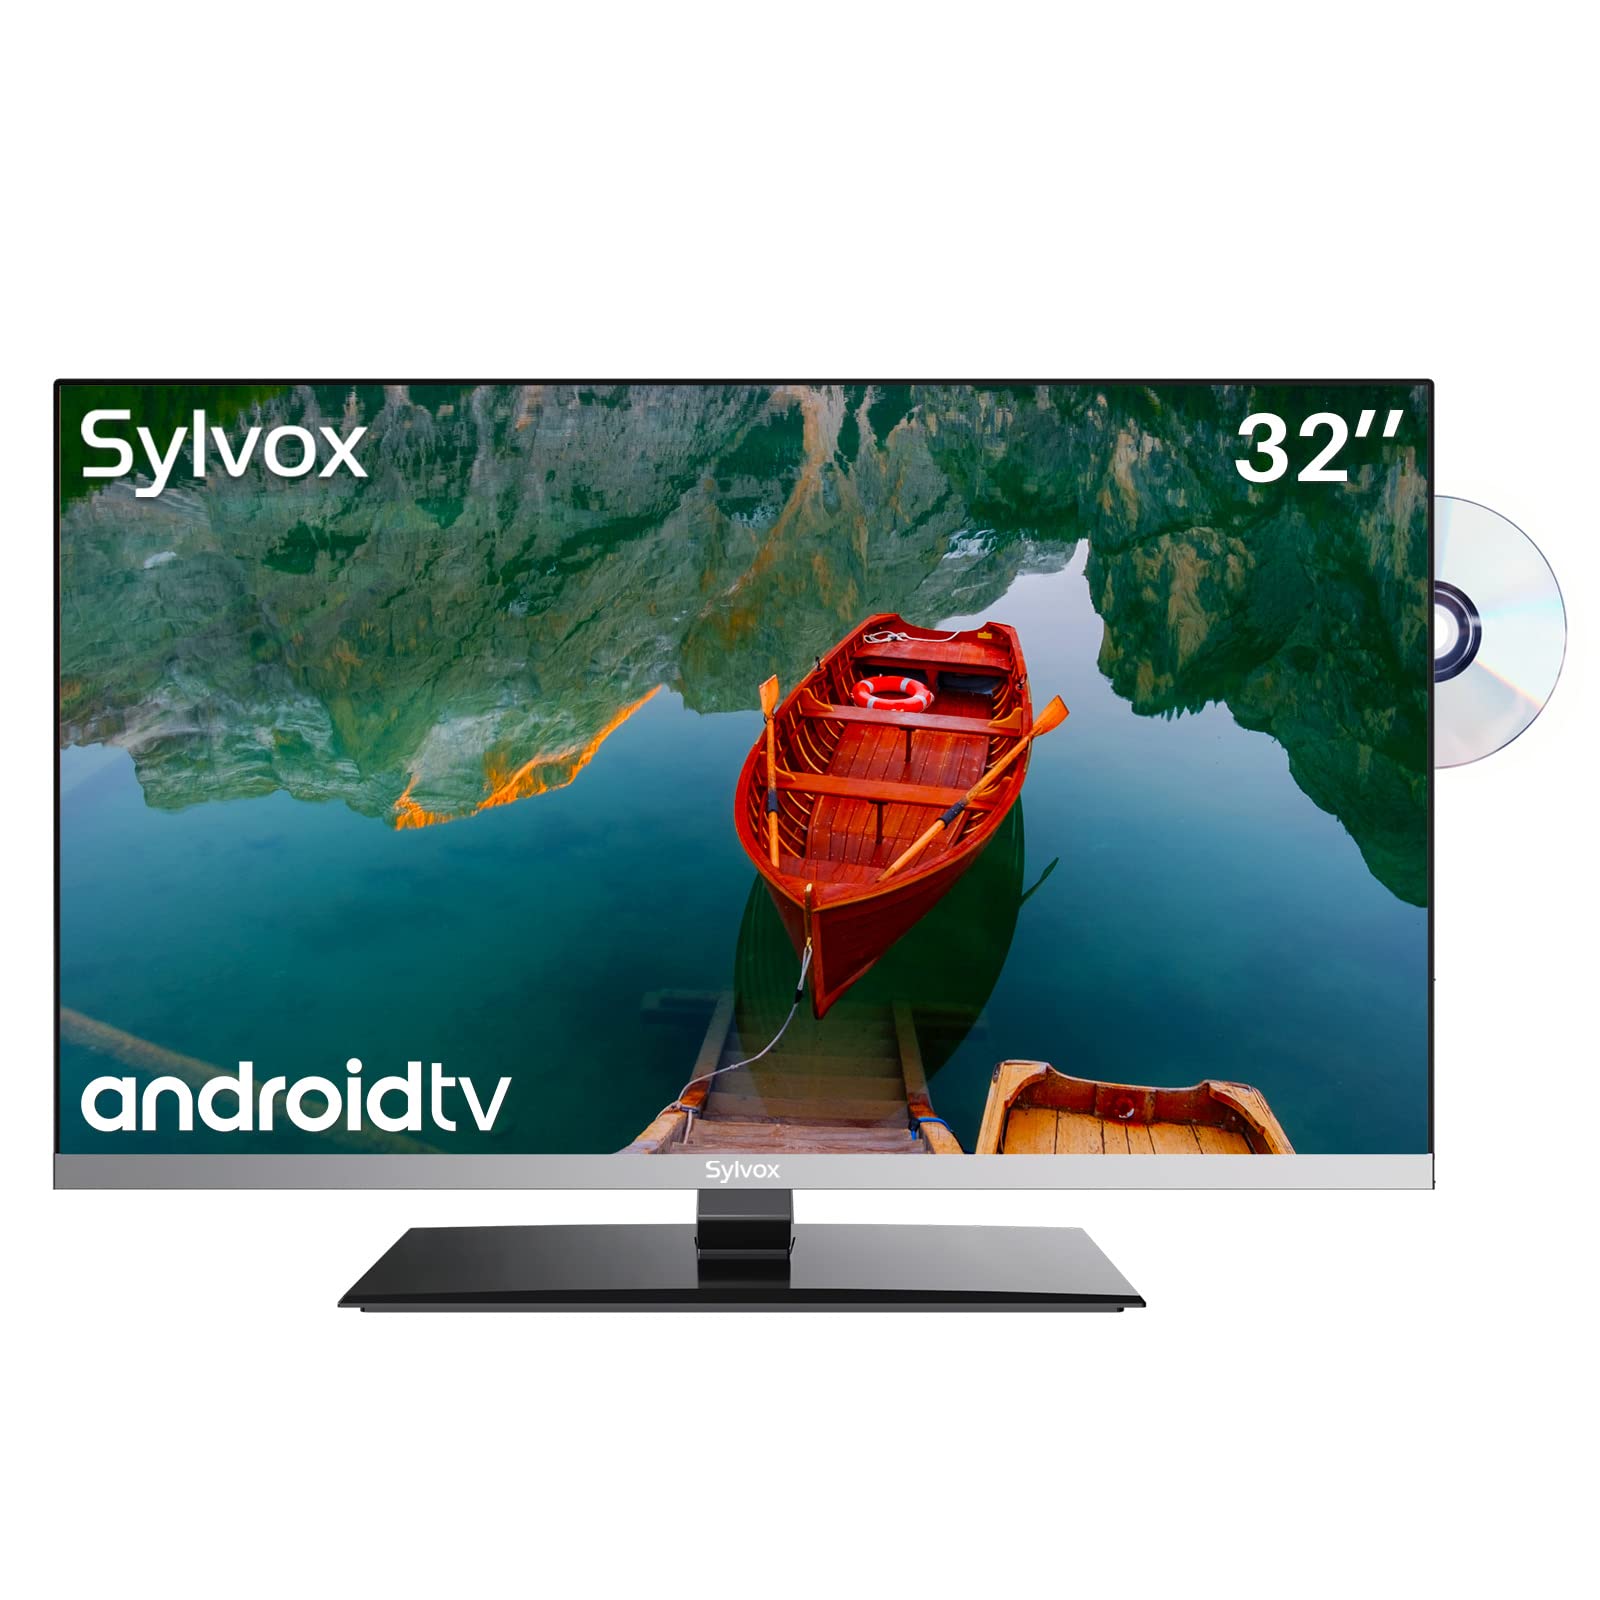 SYLVOX 32 Inch TV 12 Volt Smart TV FHD 1080P DVD Player Built-in ARC CEC WiFi Bluetooth Support Suitable for RV Camper Kitchen Bedroom Boat